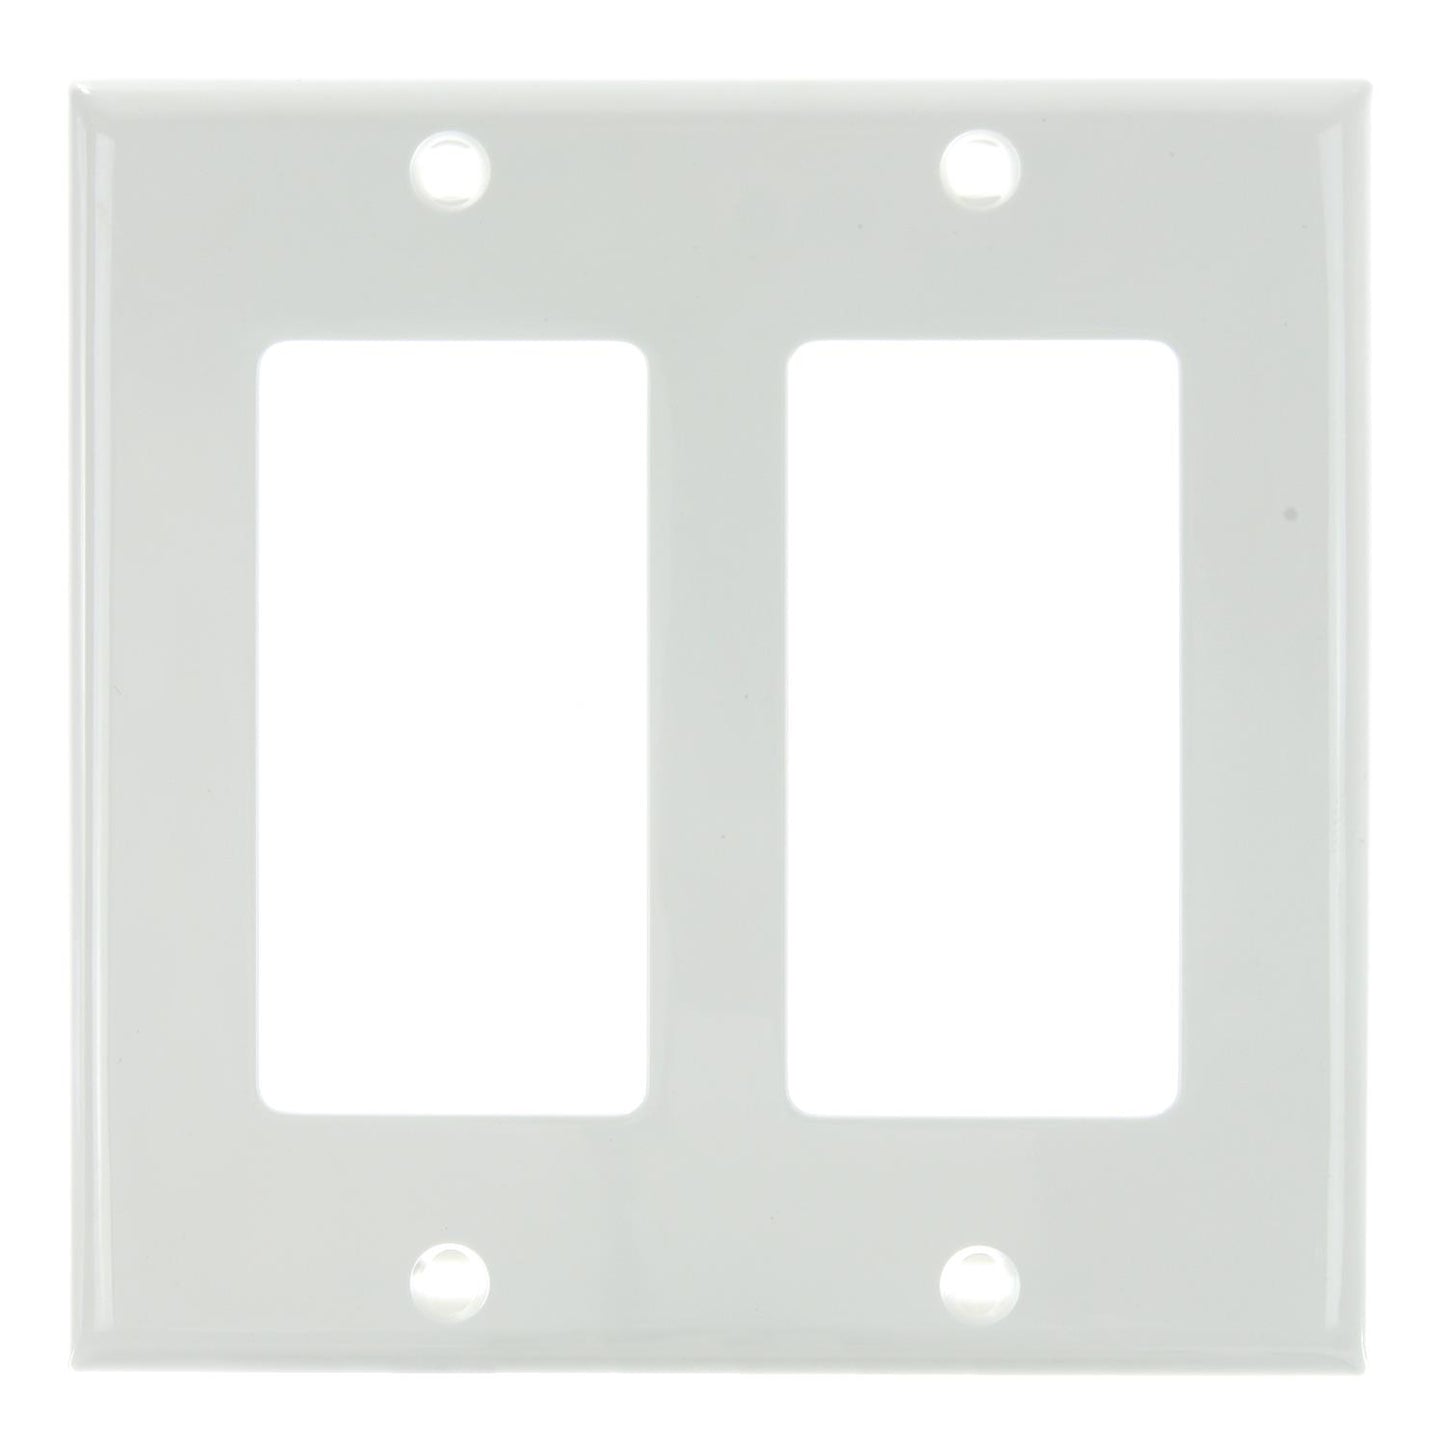 Sunlite E302/W 2 Gang Decorative Switch and Receptacle Plate, White